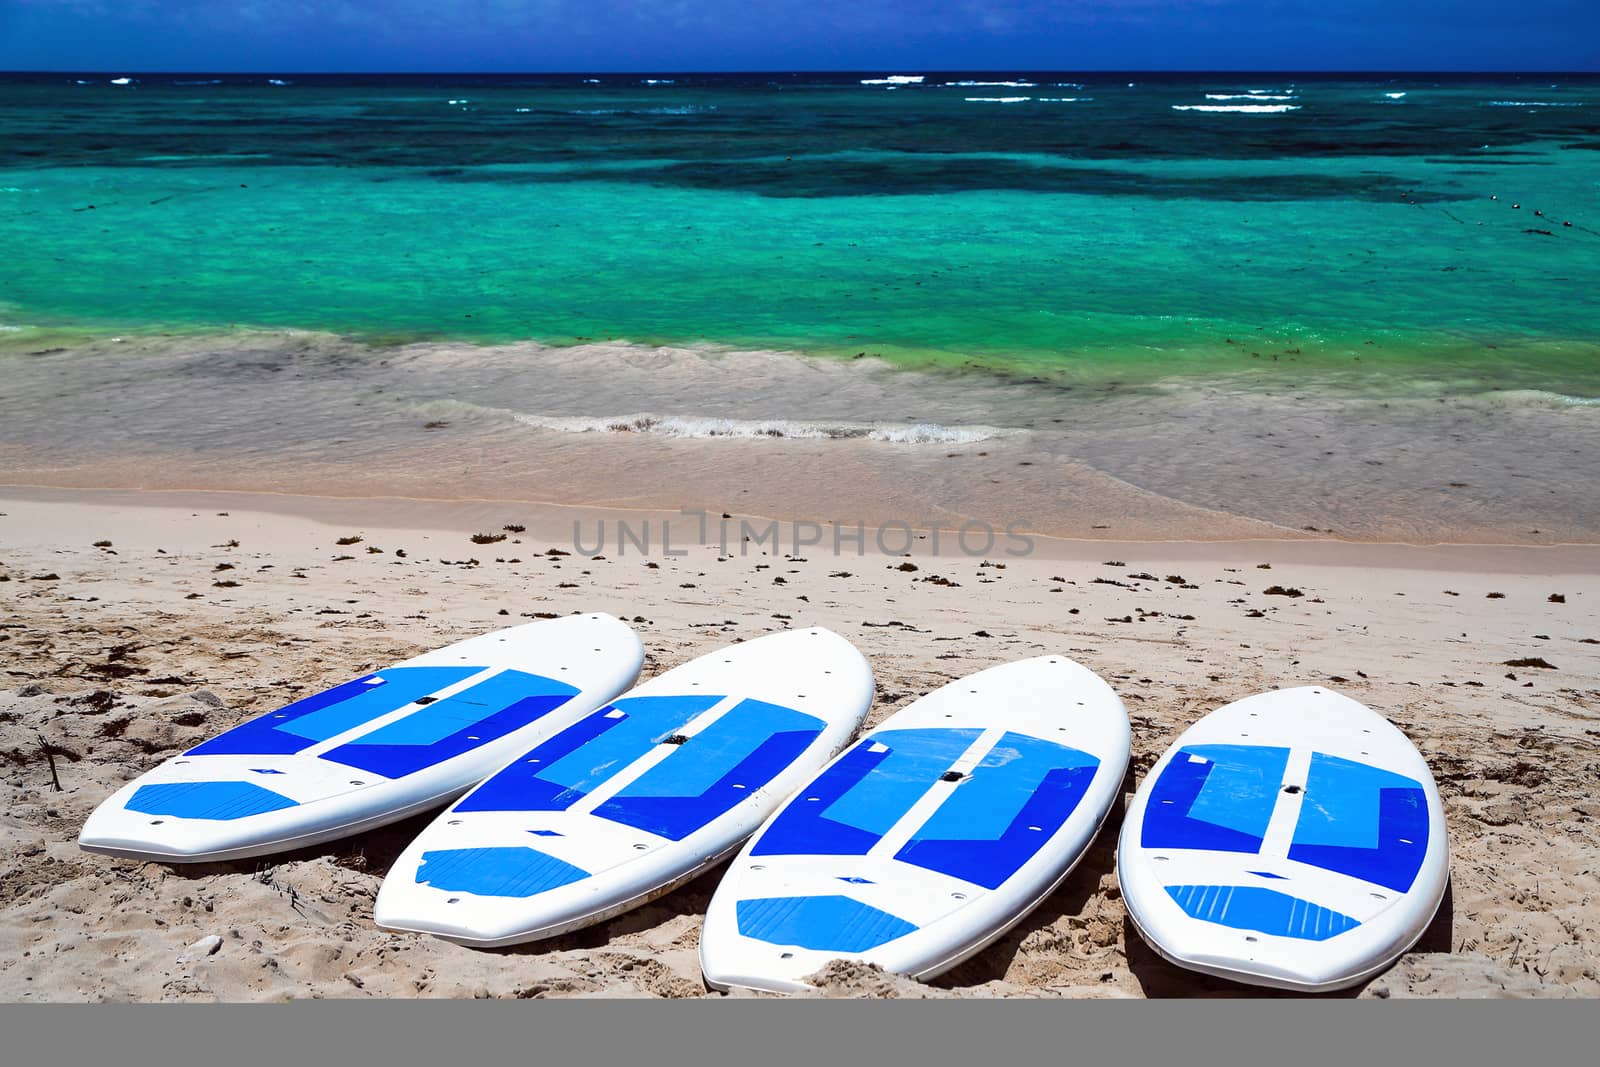 Surfboards on the beach. Surfing board on the beach with ocean view nobody. surfboards abandoned on an empty sandy beach with waves in distance. Summer sunny day on the shores of the Atlantic Ocean. Emerald water with white sand and blue sky. Bavaro beach.